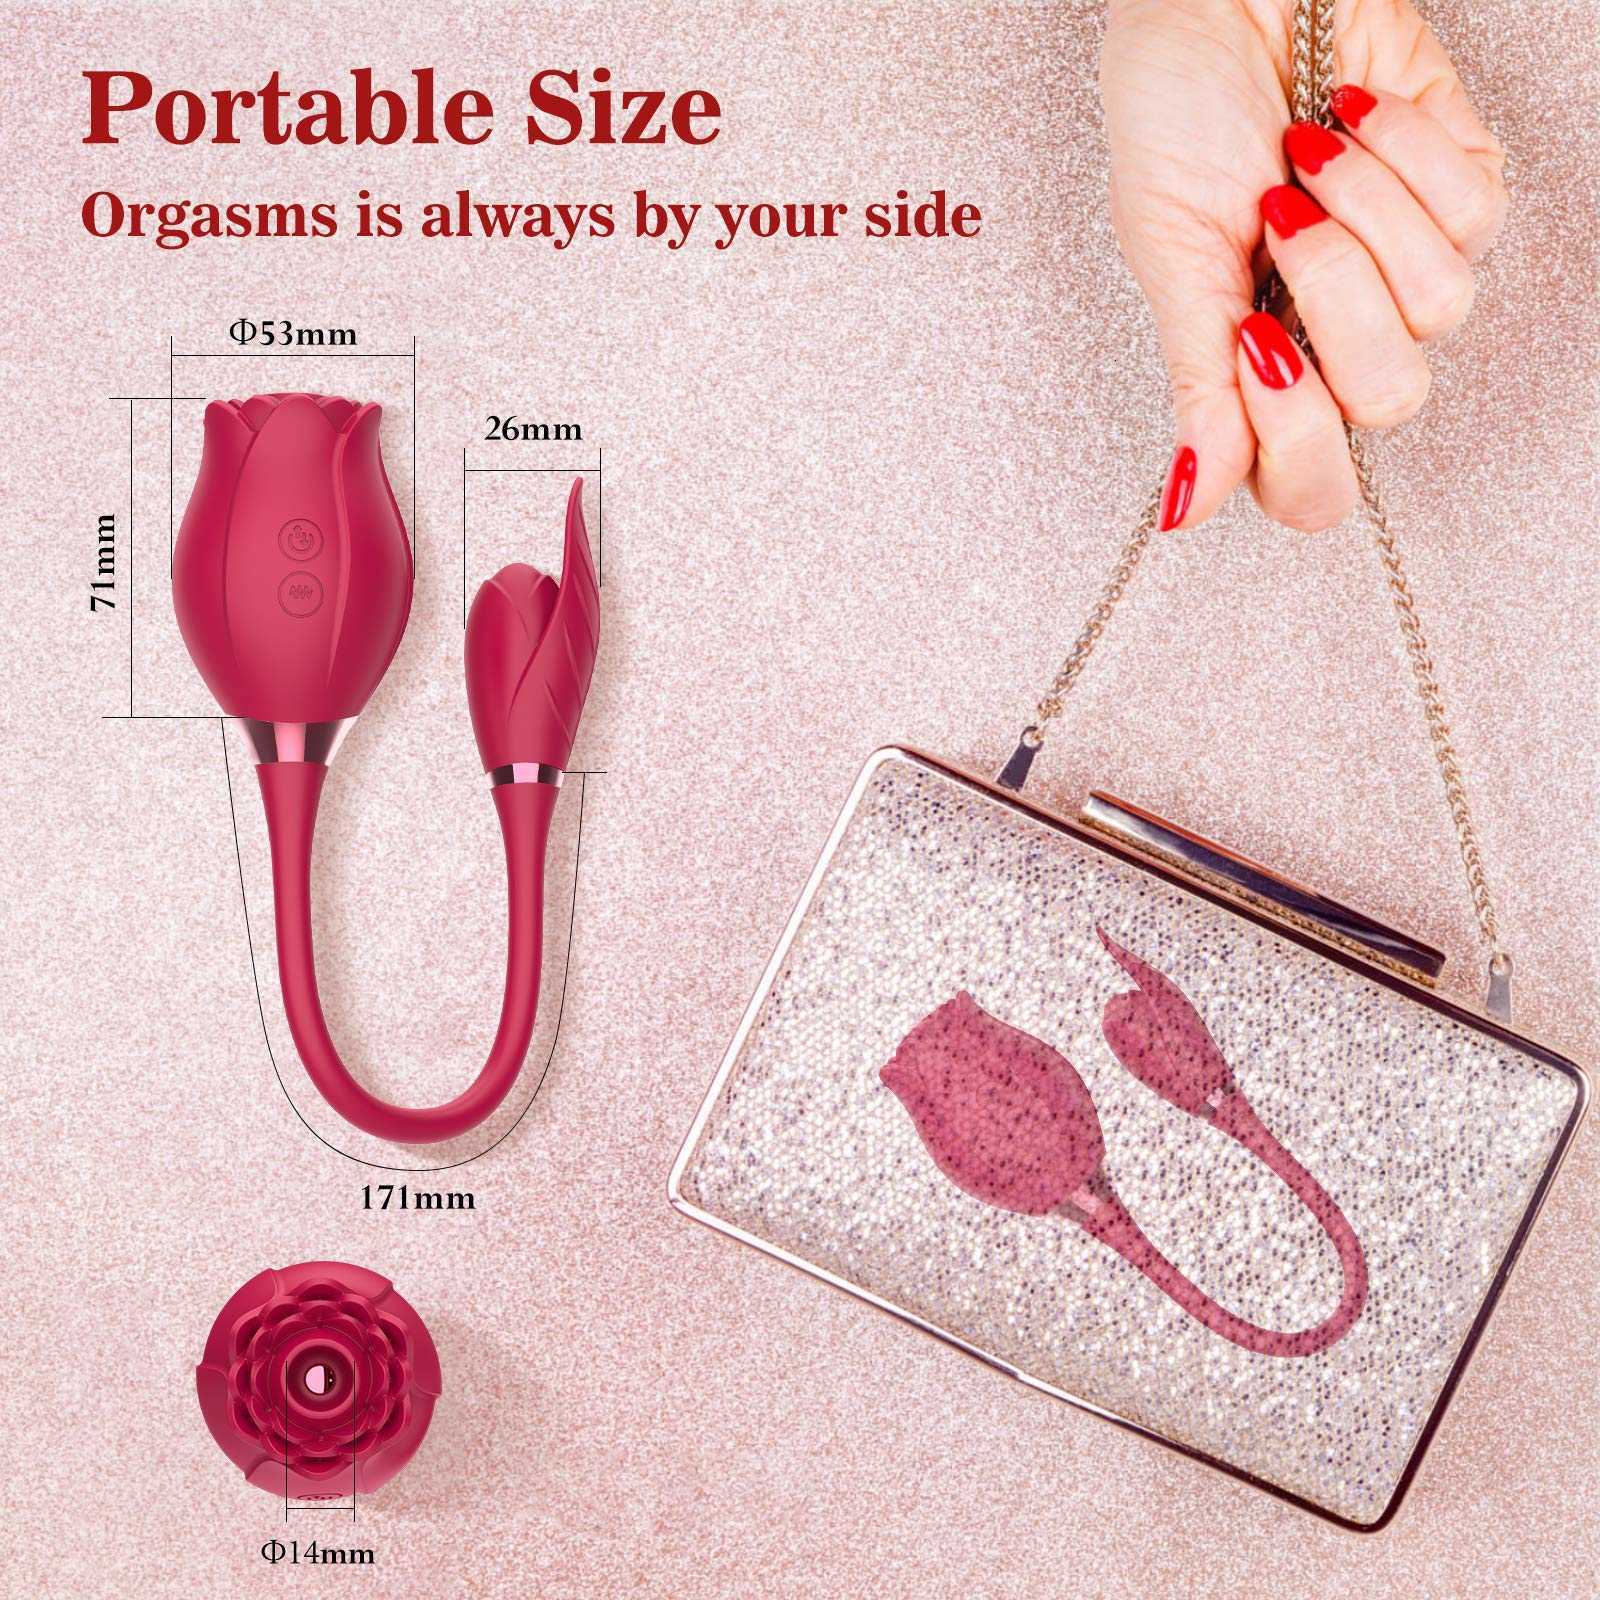 Massager Rose Vibrator Clitoral Sucking with Vibrating Egg Suction Vaginal Anal Stimulator Adult for Women